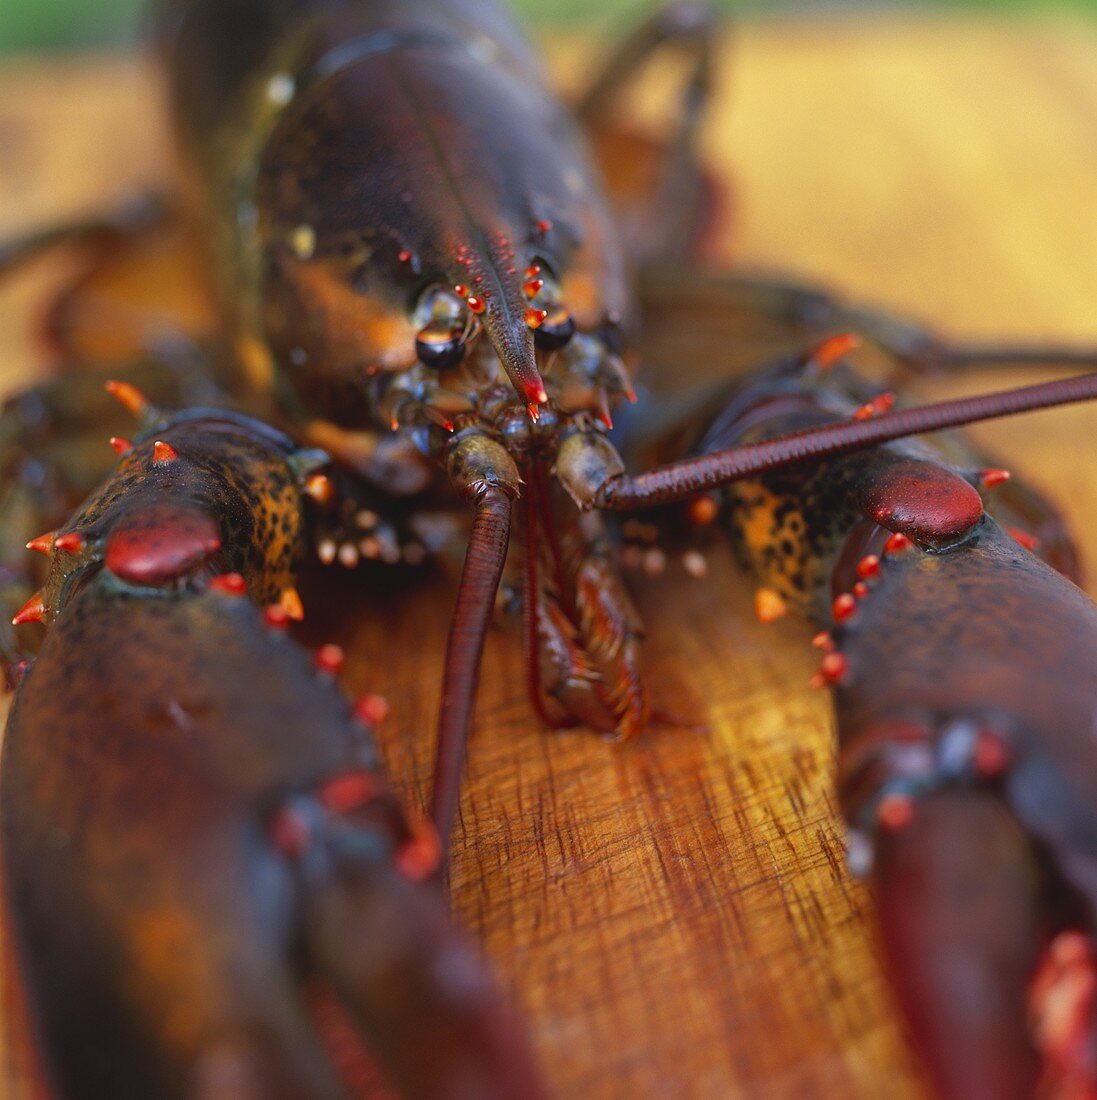 Live Maine lobster on wooden board